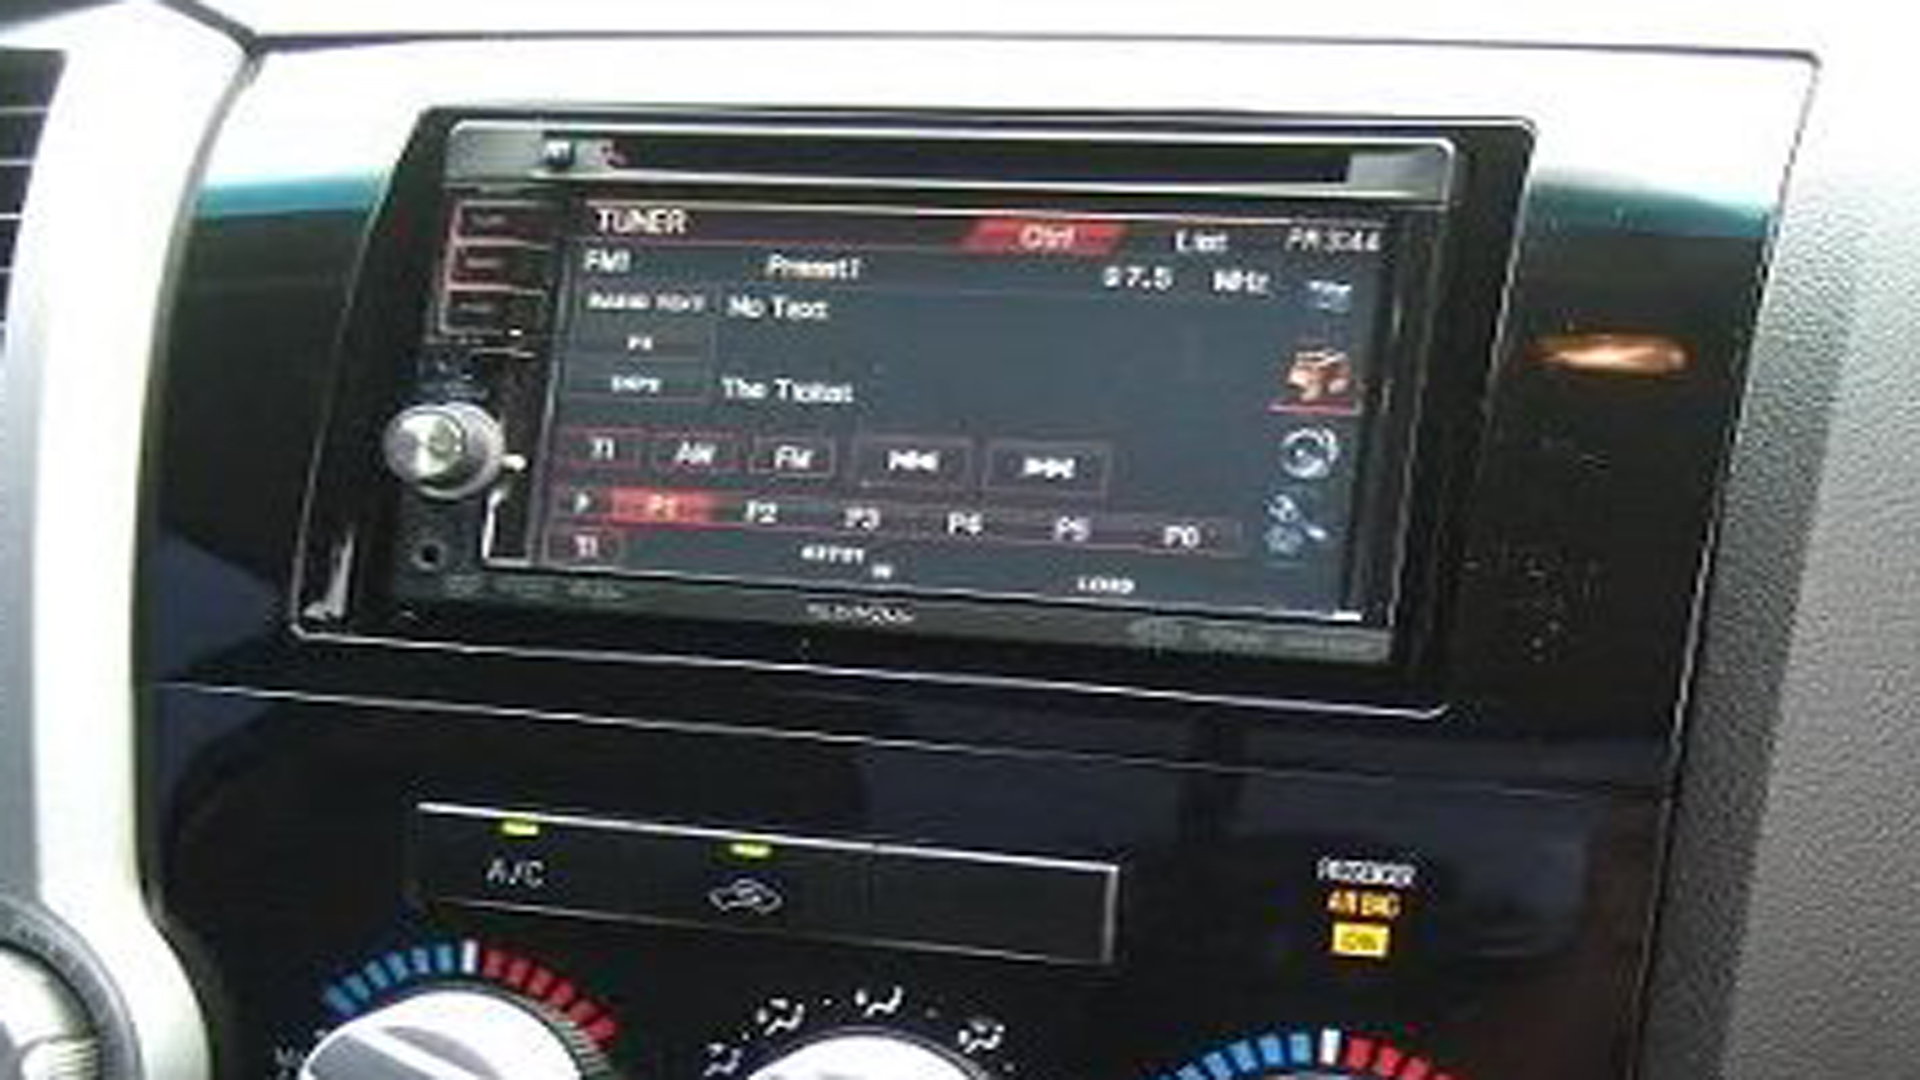 Toyota Tundra: How to Install Car Stereo | Yotatech